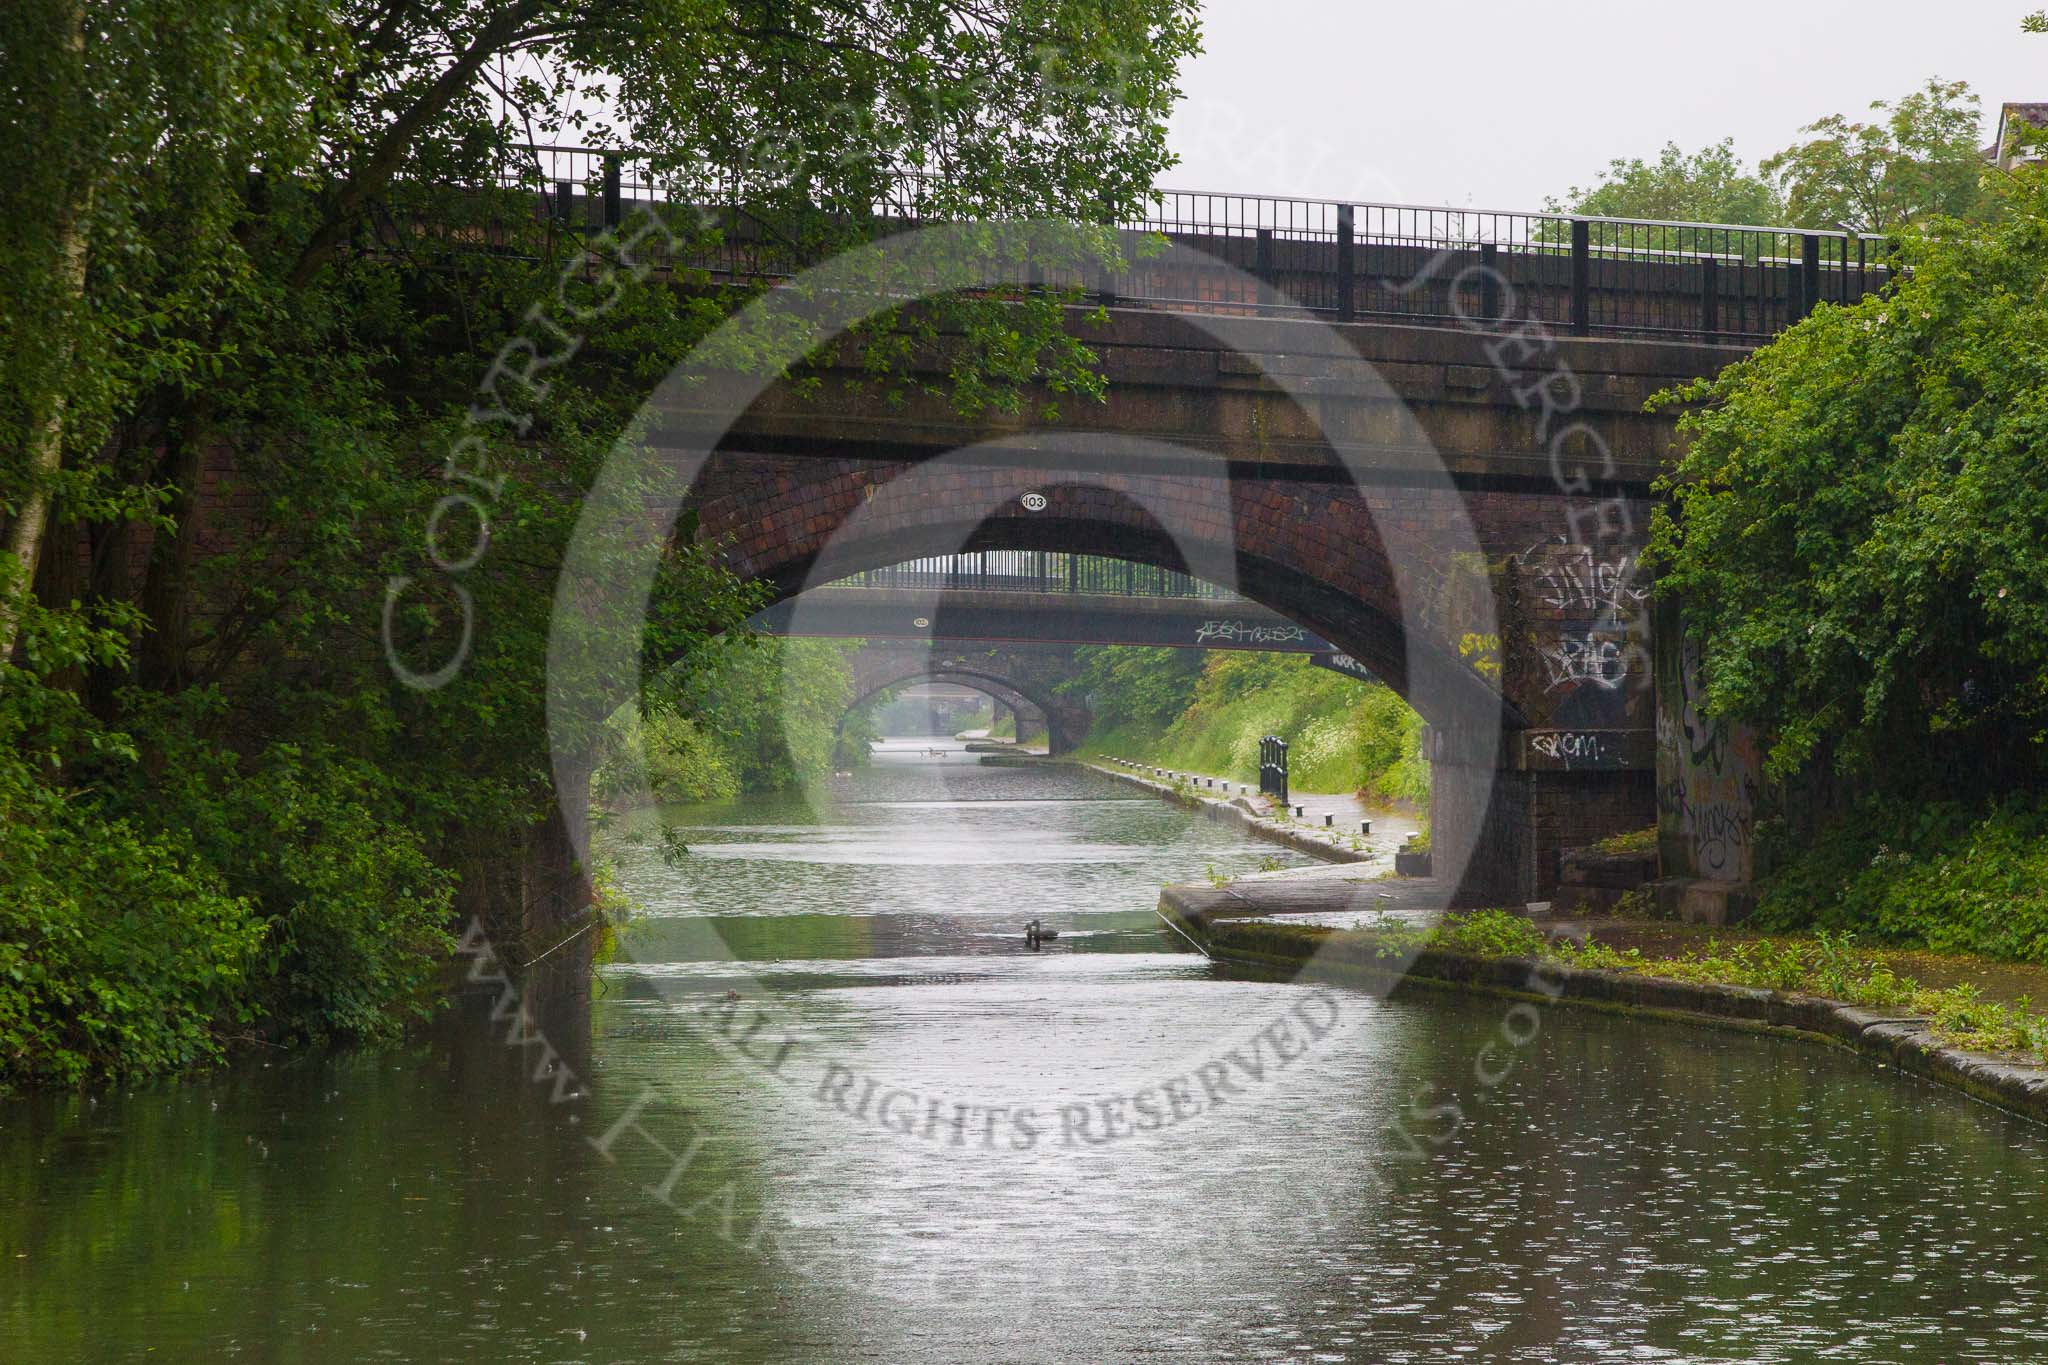 BCN Marathon Challenge 2014: There are five bridges in the line of view on the Grand Union Canal between Garrison Locks and Bordesley Junction.
Birmingham Canal Navigation,


United Kingdom,
on 24 May 2014 at 09:18, image #83